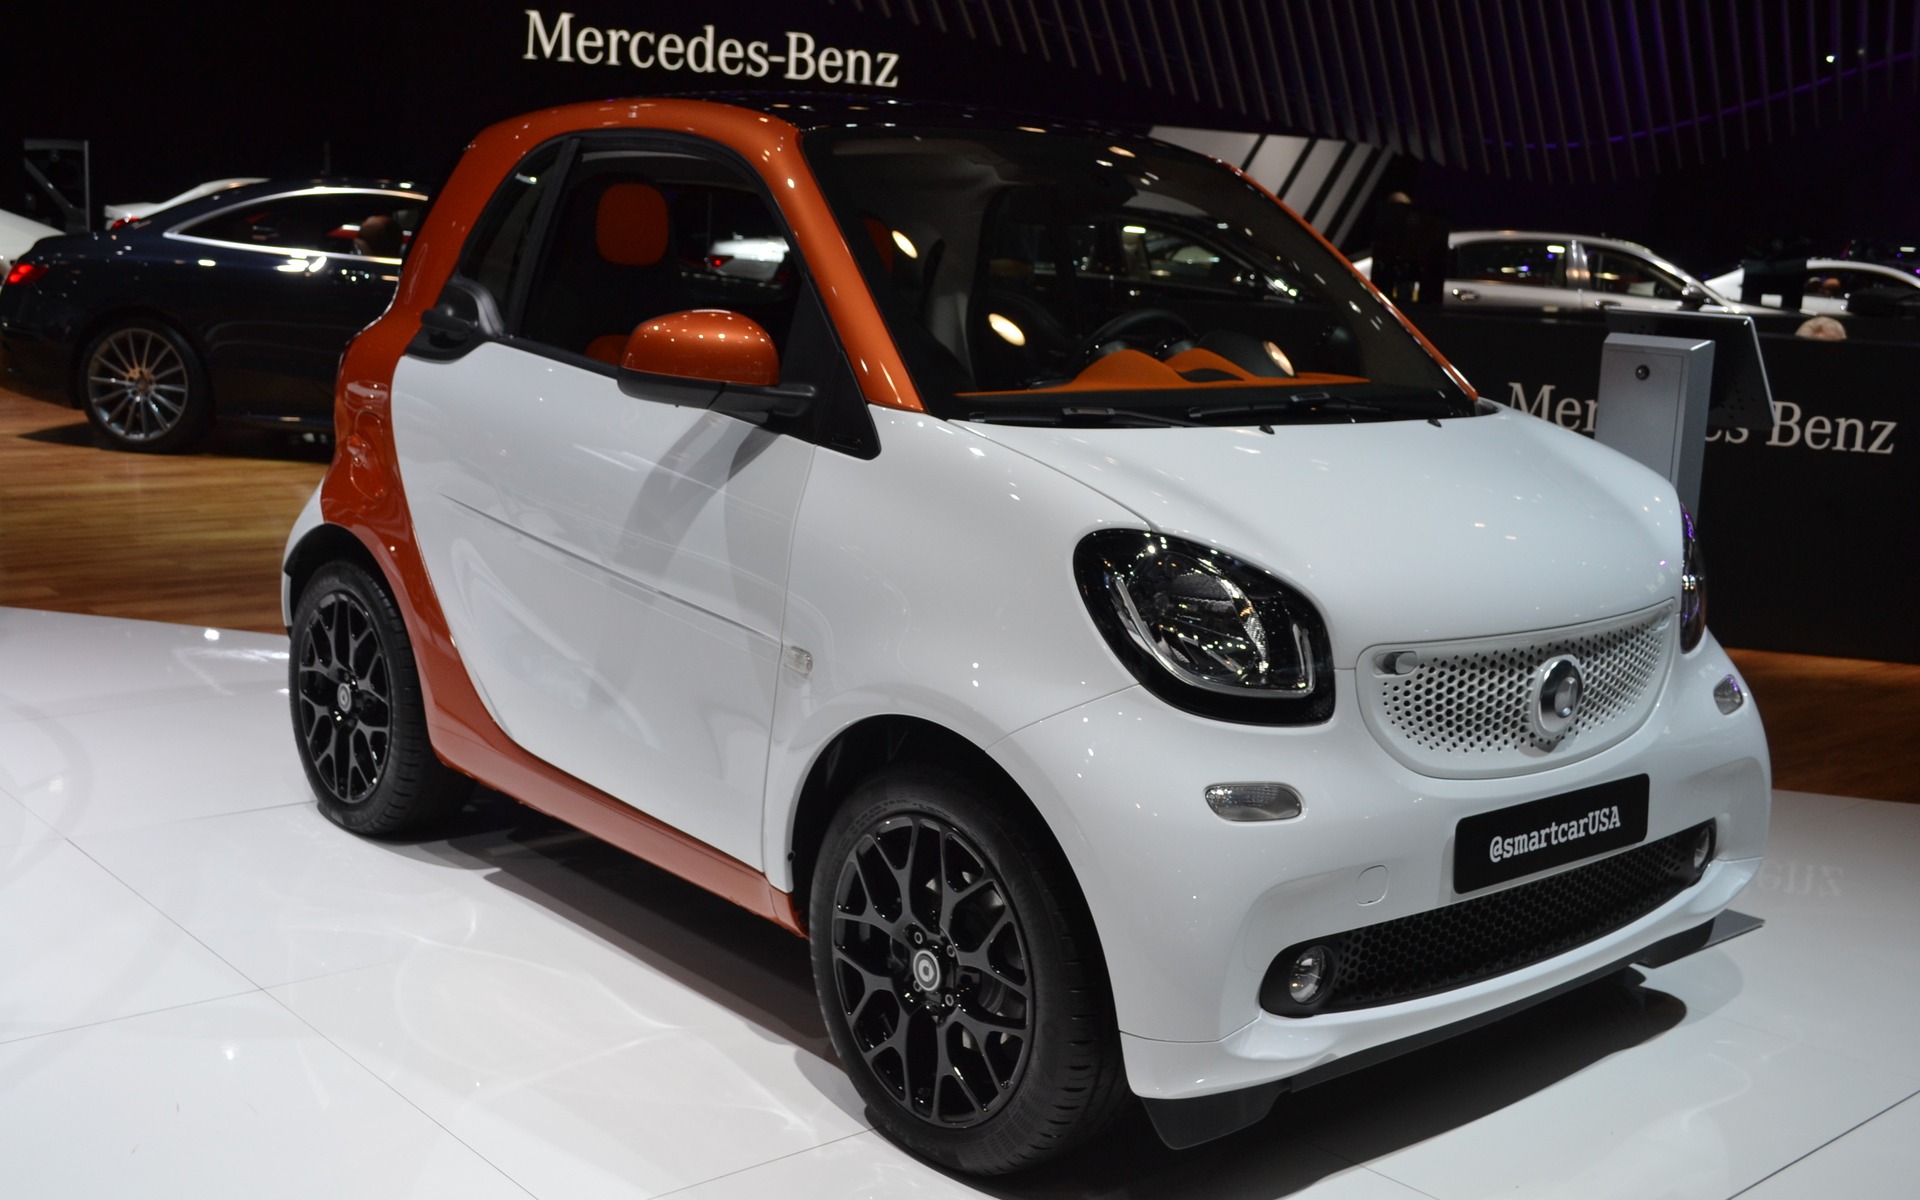 2016 smart fortwo: A Nice Little Thing - The Car Guide